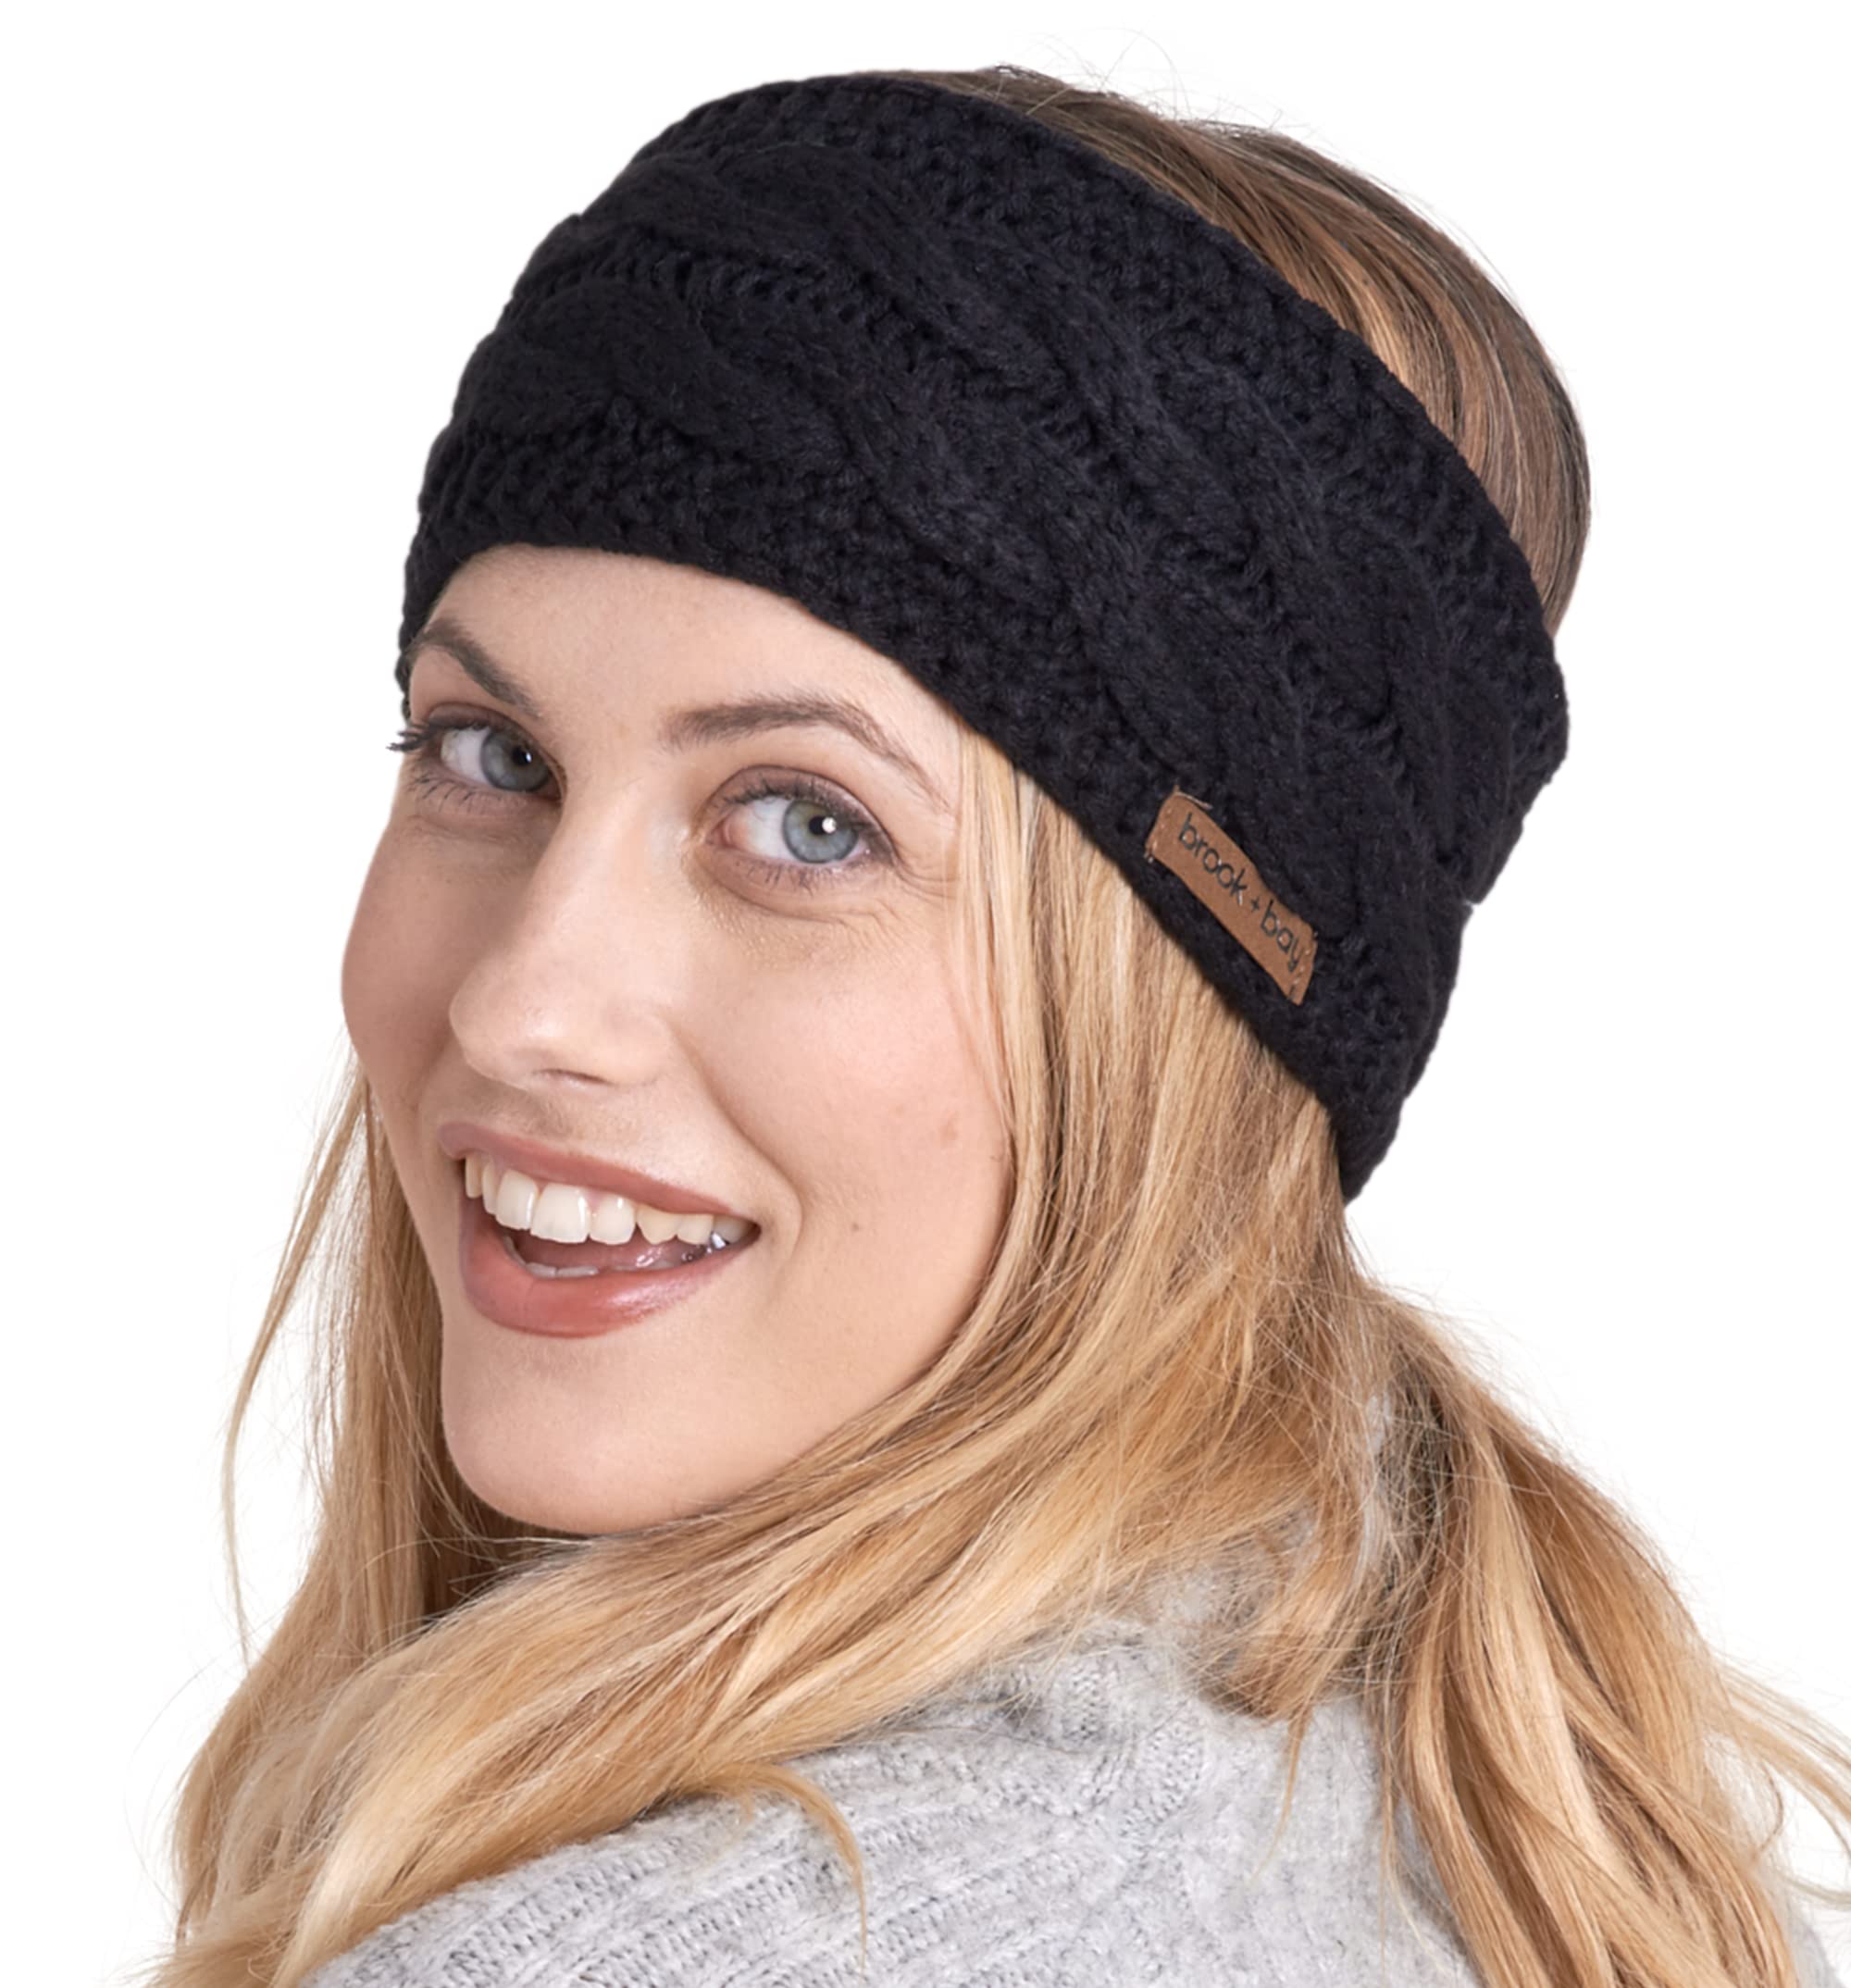 Brook + Bay Womens Winter Ear Warmer Headband - Fleece Lined Cable Knit Ear  Band Covers for Cold Weather - Soft & Stretchy Head Wrap Black